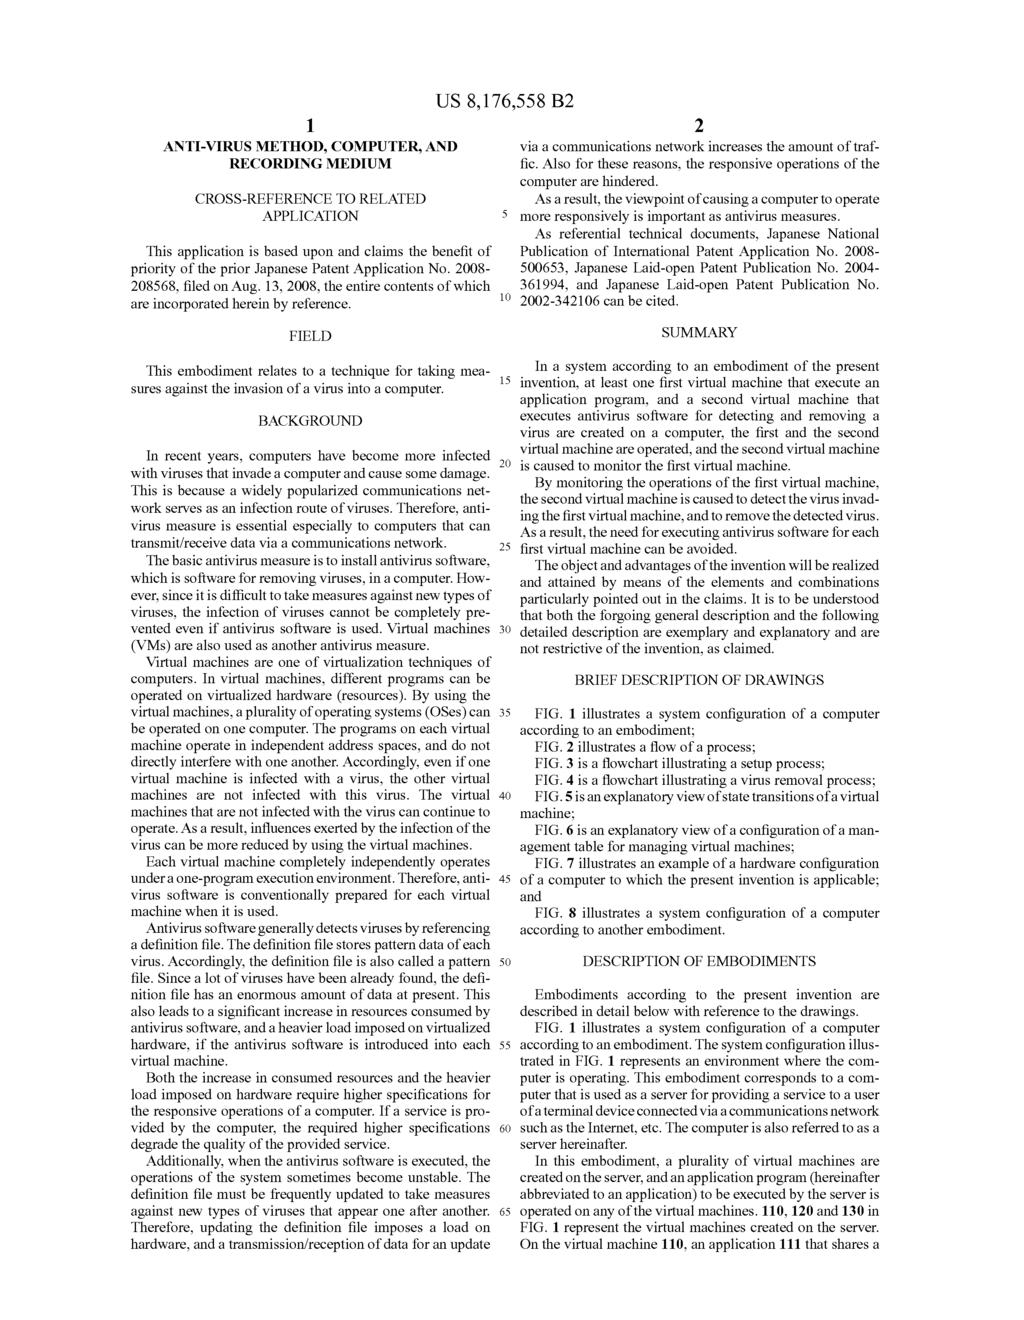 1. ANTI-VIRUS METHOD, COMPUTER, AND RECORDING MEDIUM CROSS-REFERENCE TO RELATED APPLICATION This application is based upon and claims the benefit of priority of the prior Japanese Patent Application